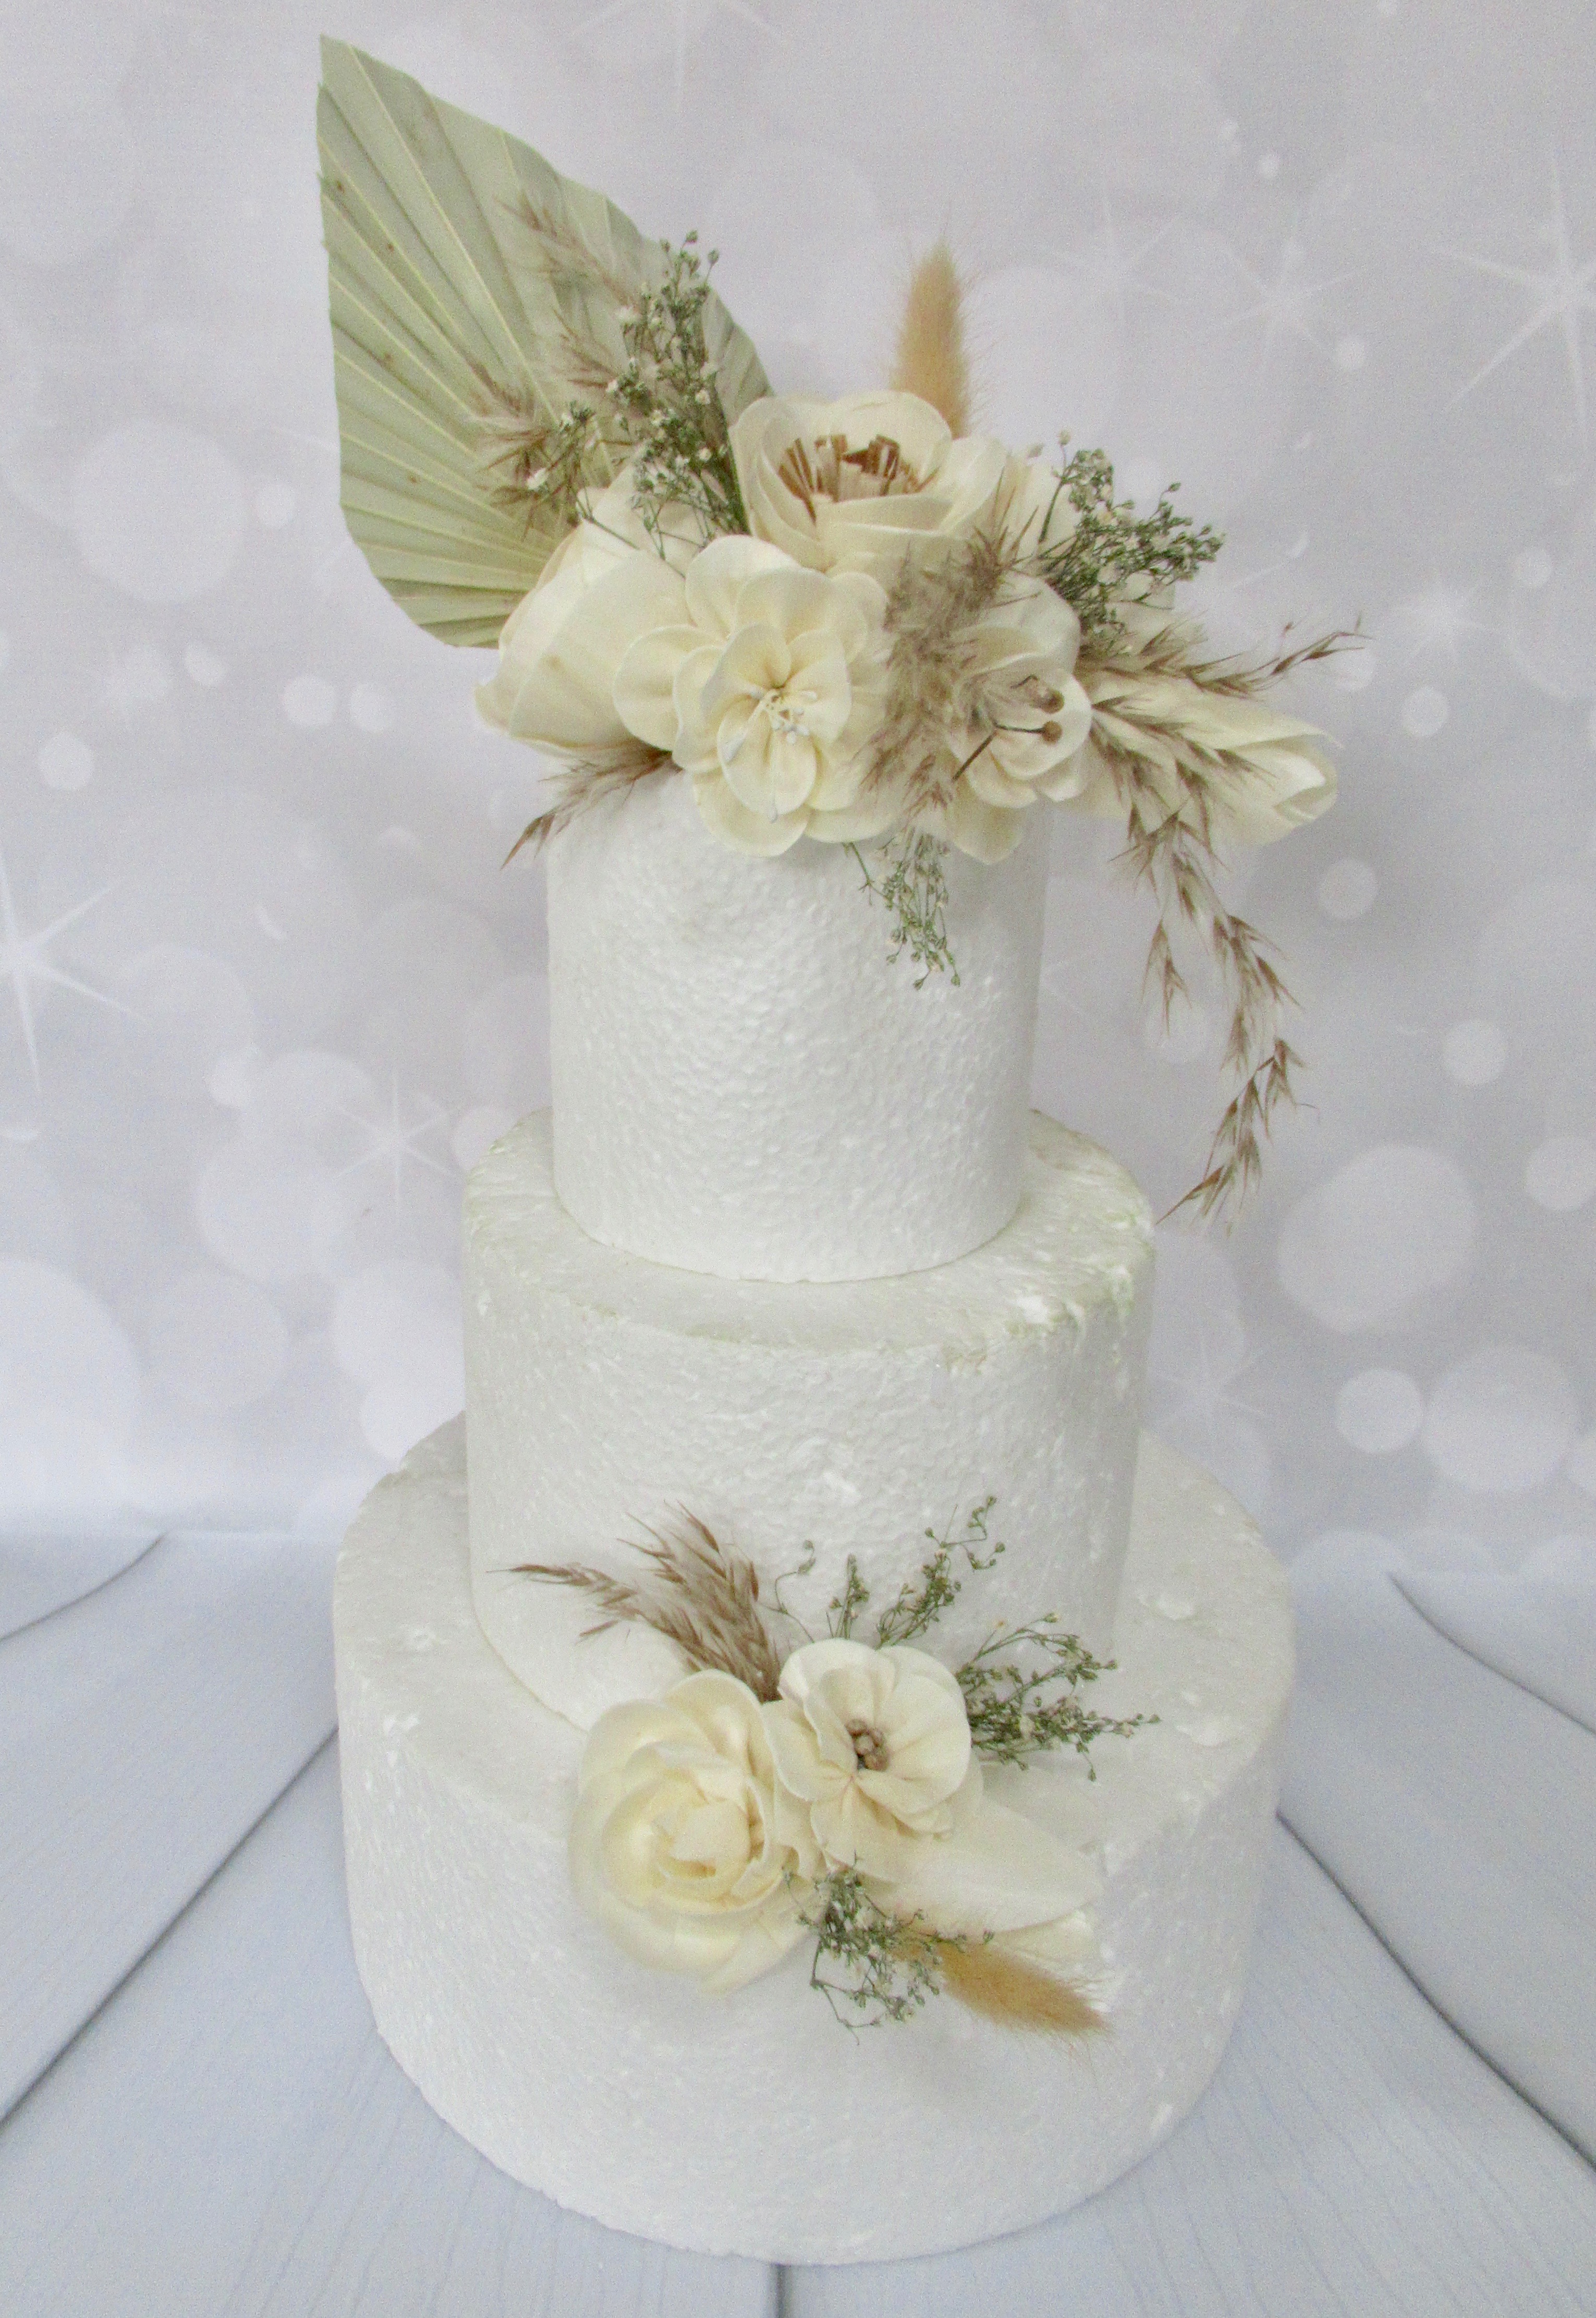 Boho Cake Flowers, Dried Flowers for cakes, preserved flowers for wedding cakes